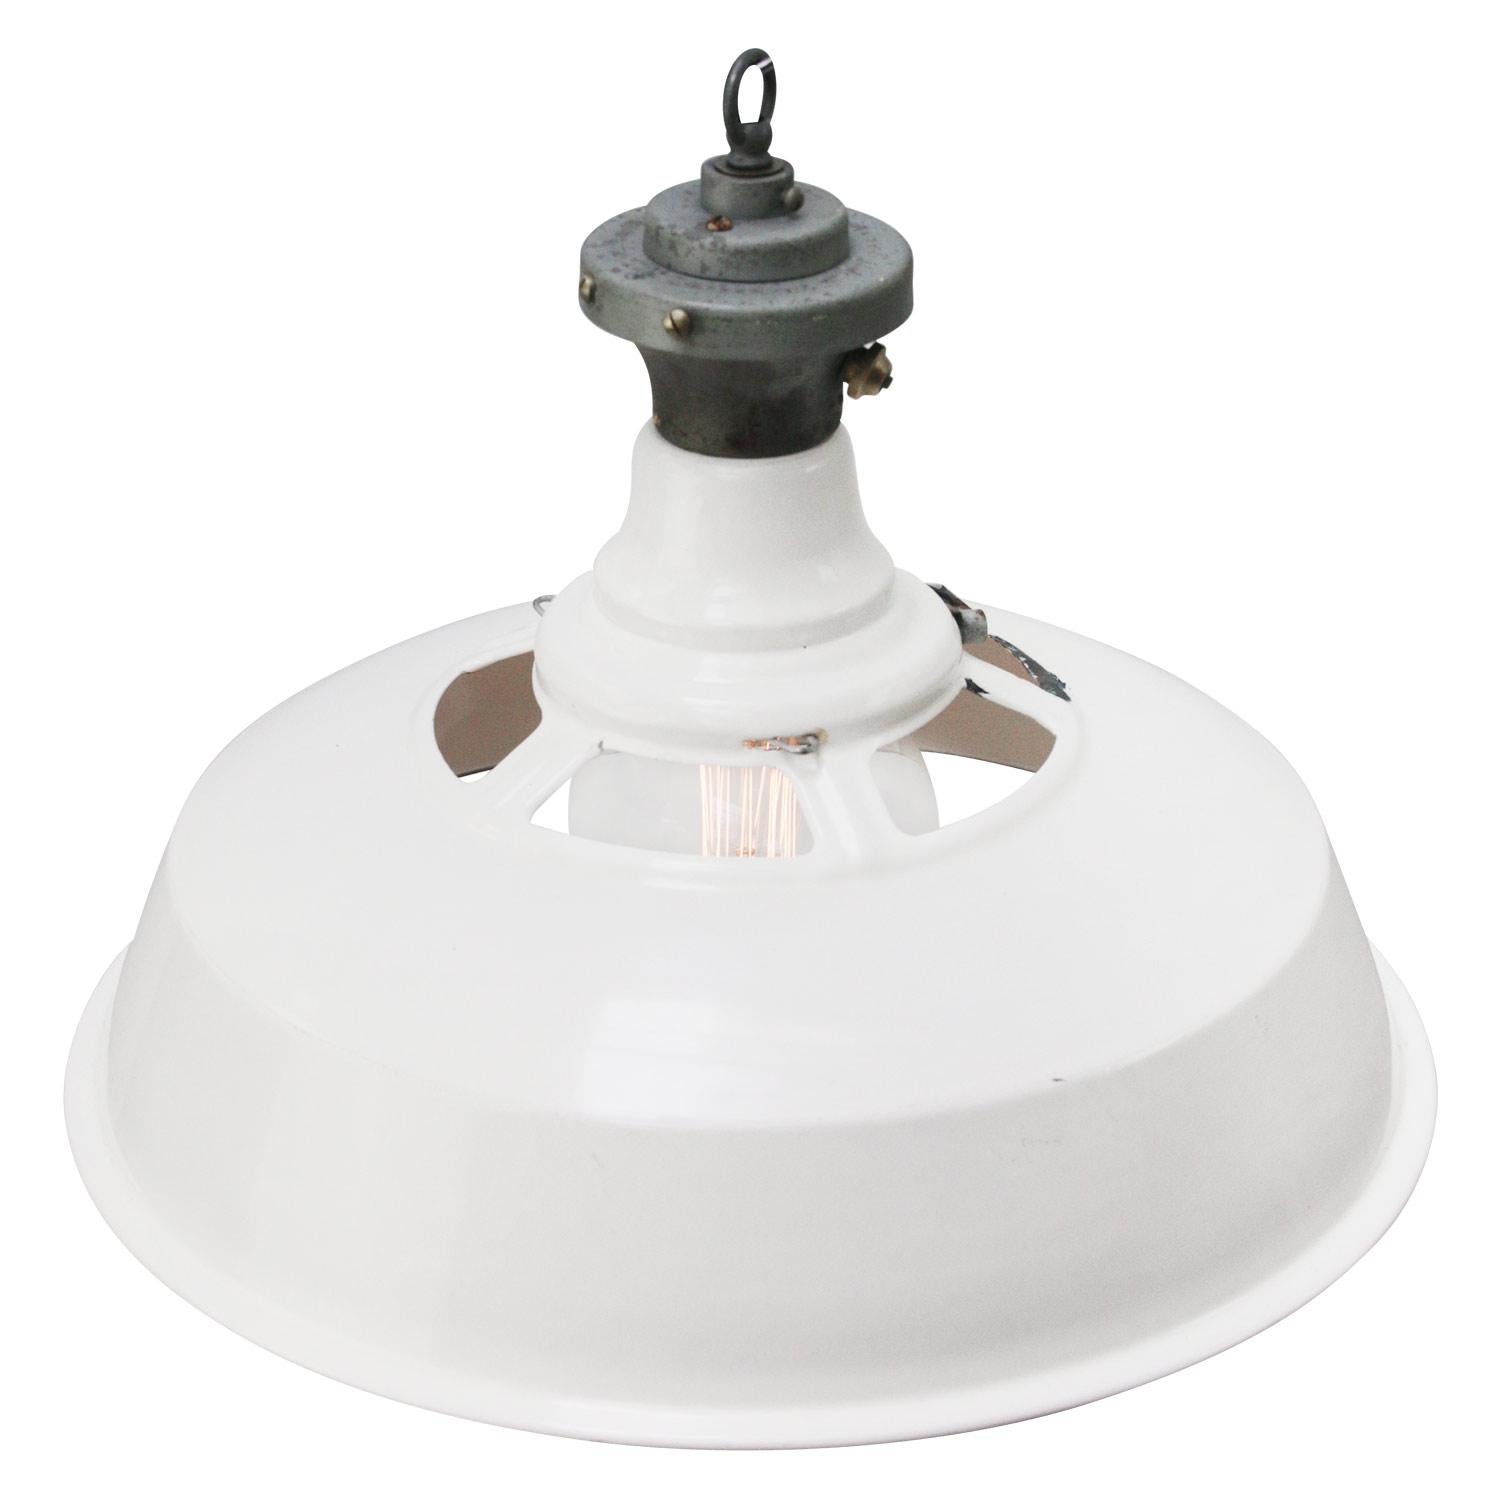 Factory American hanging lights. White enamel. White interior.

Weight 2.50 kg / 5.5 lb

Priced per individual item. All lamps have been made suitable by international standards for incandescent light bulbs, energy-efficient and LED bulbs.